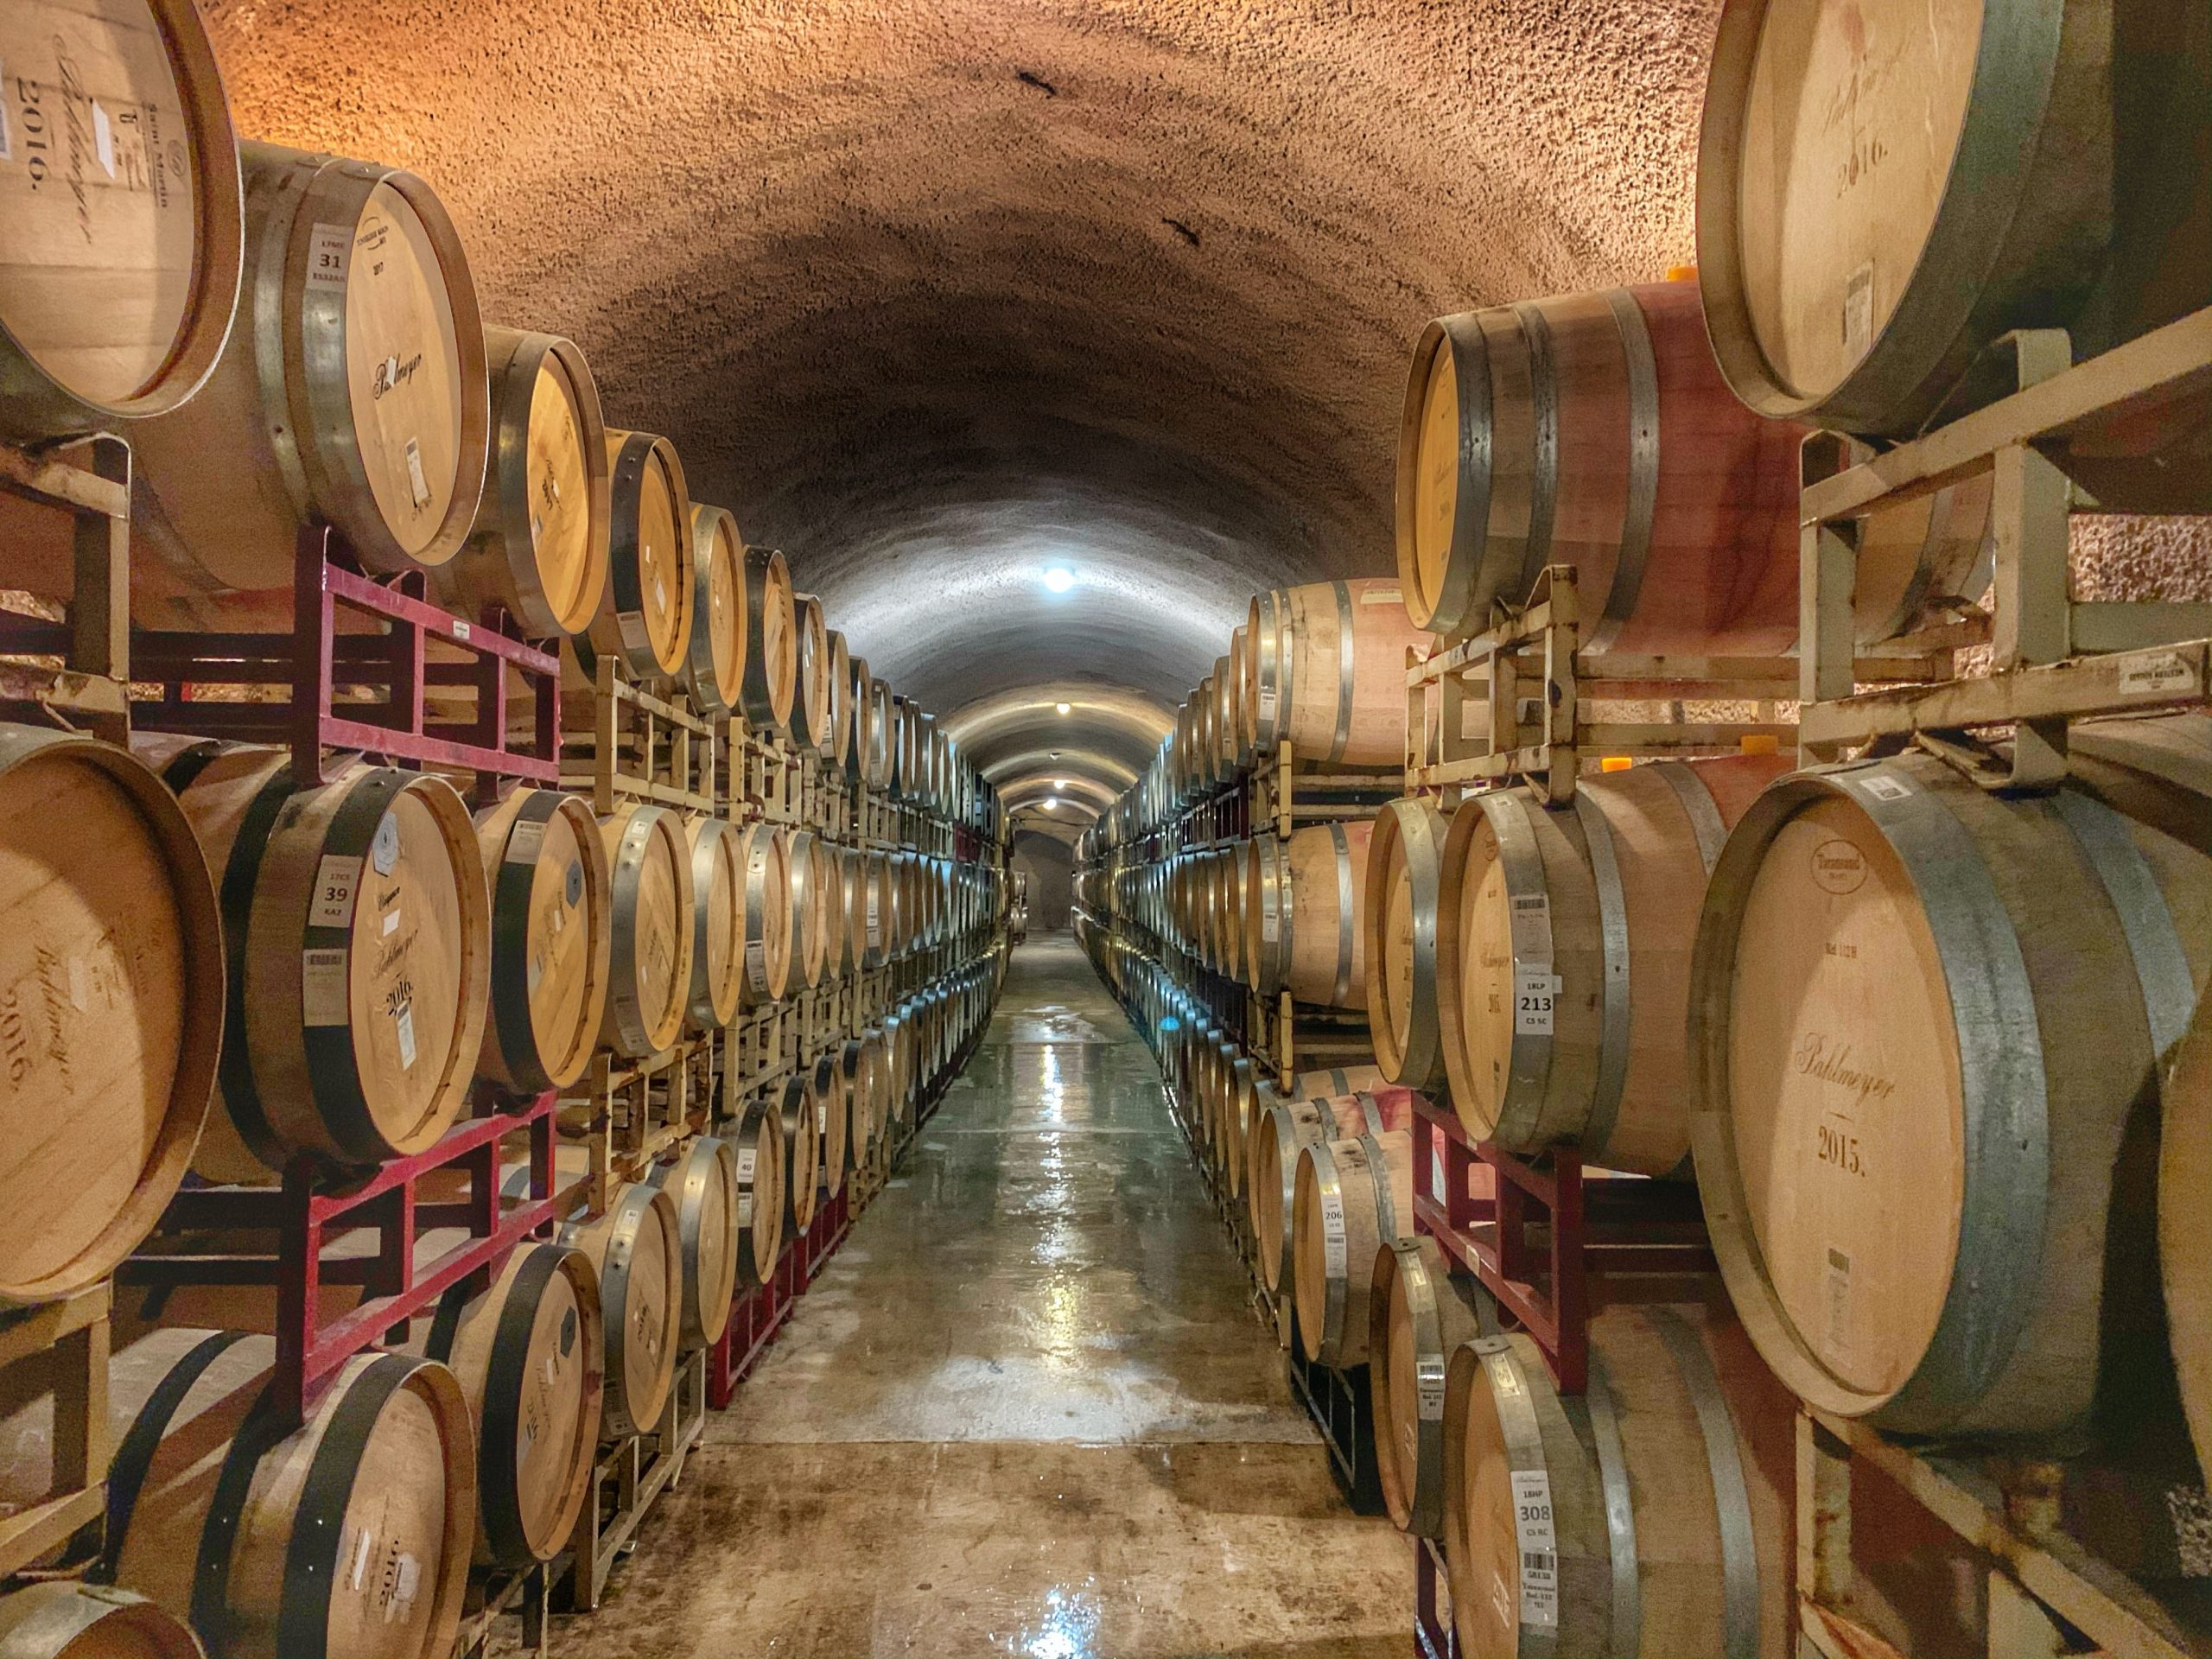 Get Expertly Crafted SEO To Help Your Winery Stand Out in Search Results